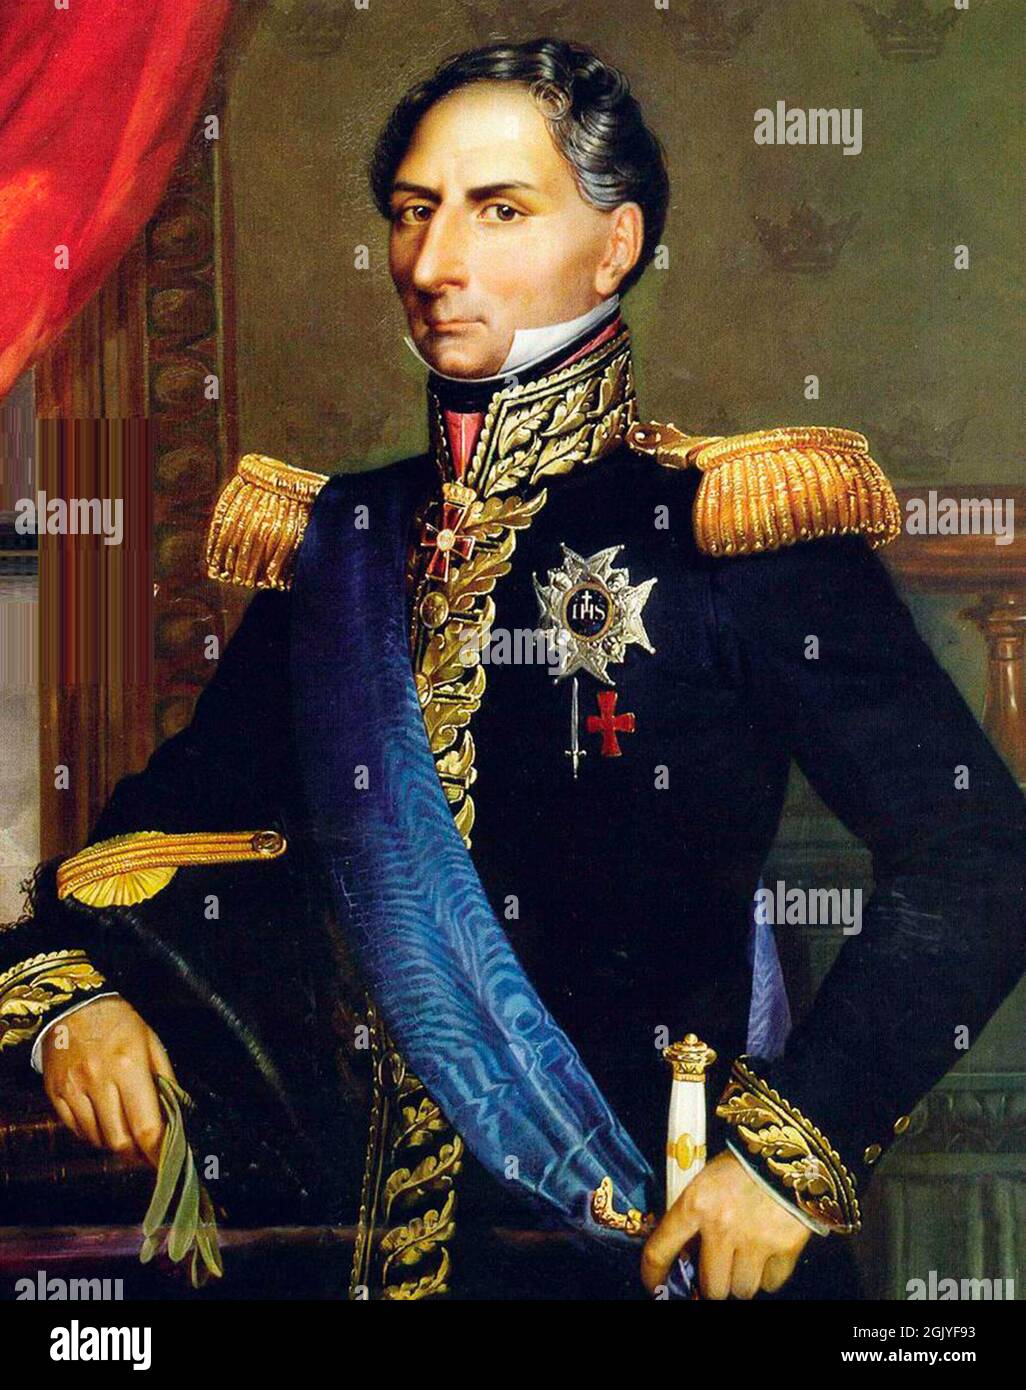 Marshal Jean-Baptiste Bernadotte who became King Carl XIV John of Sweden, Carl III John of Norway. Napoleon's trusted Maréchals. Napoleon only promoted his men by merit, not by their title, which gave him a formidable army during the Napoleonic Wars.  Bernadotte was the son of a prosecutor. Stock Photo